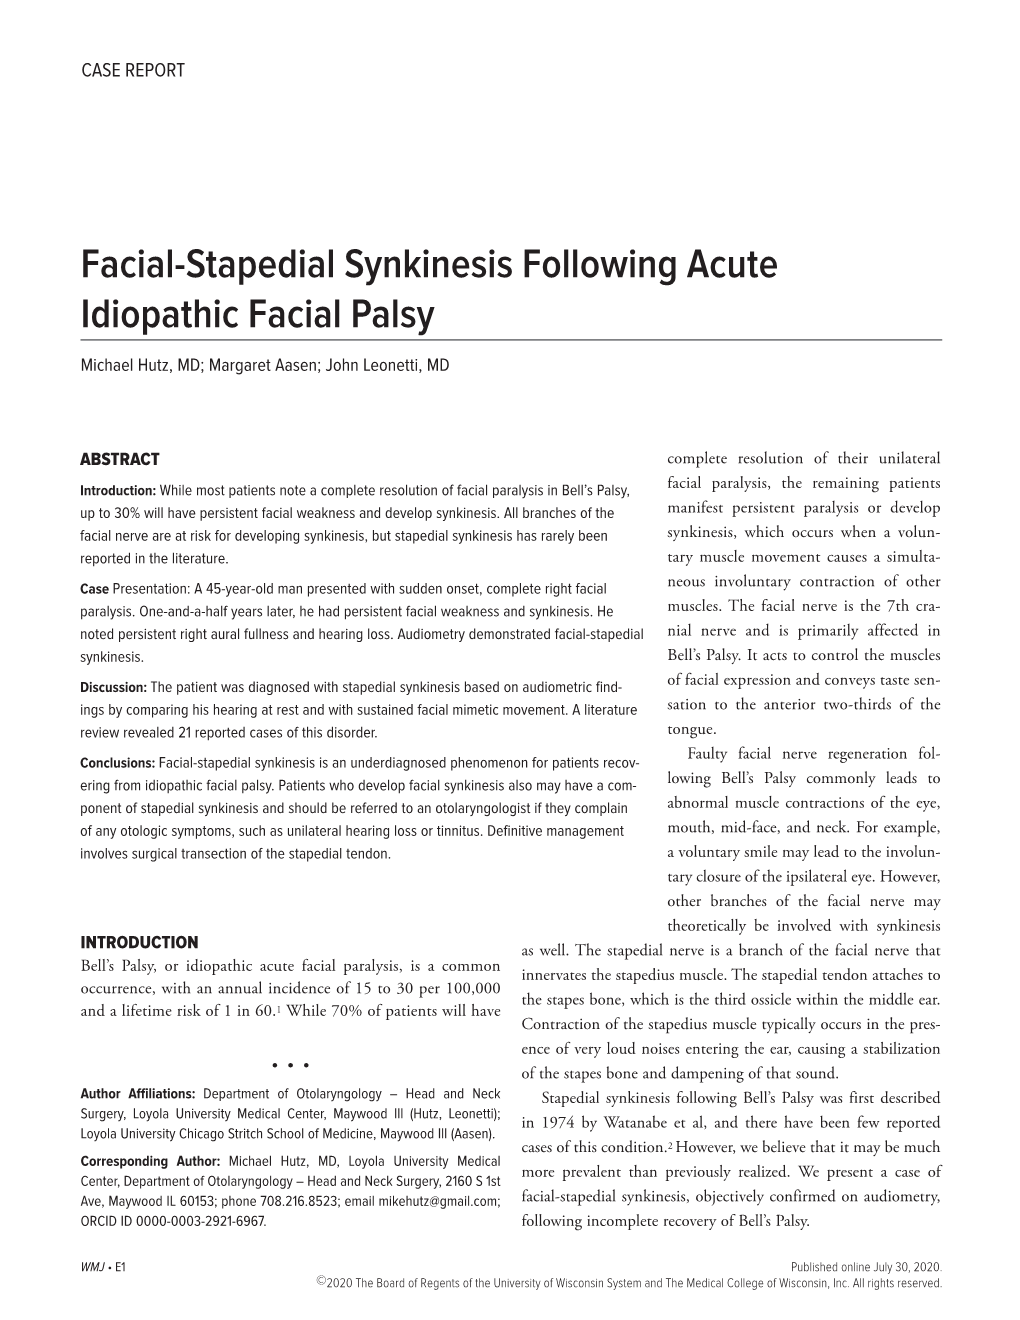 Facial-Stapedial Synkinesis Following Acute Idiopathic Facial Palsy